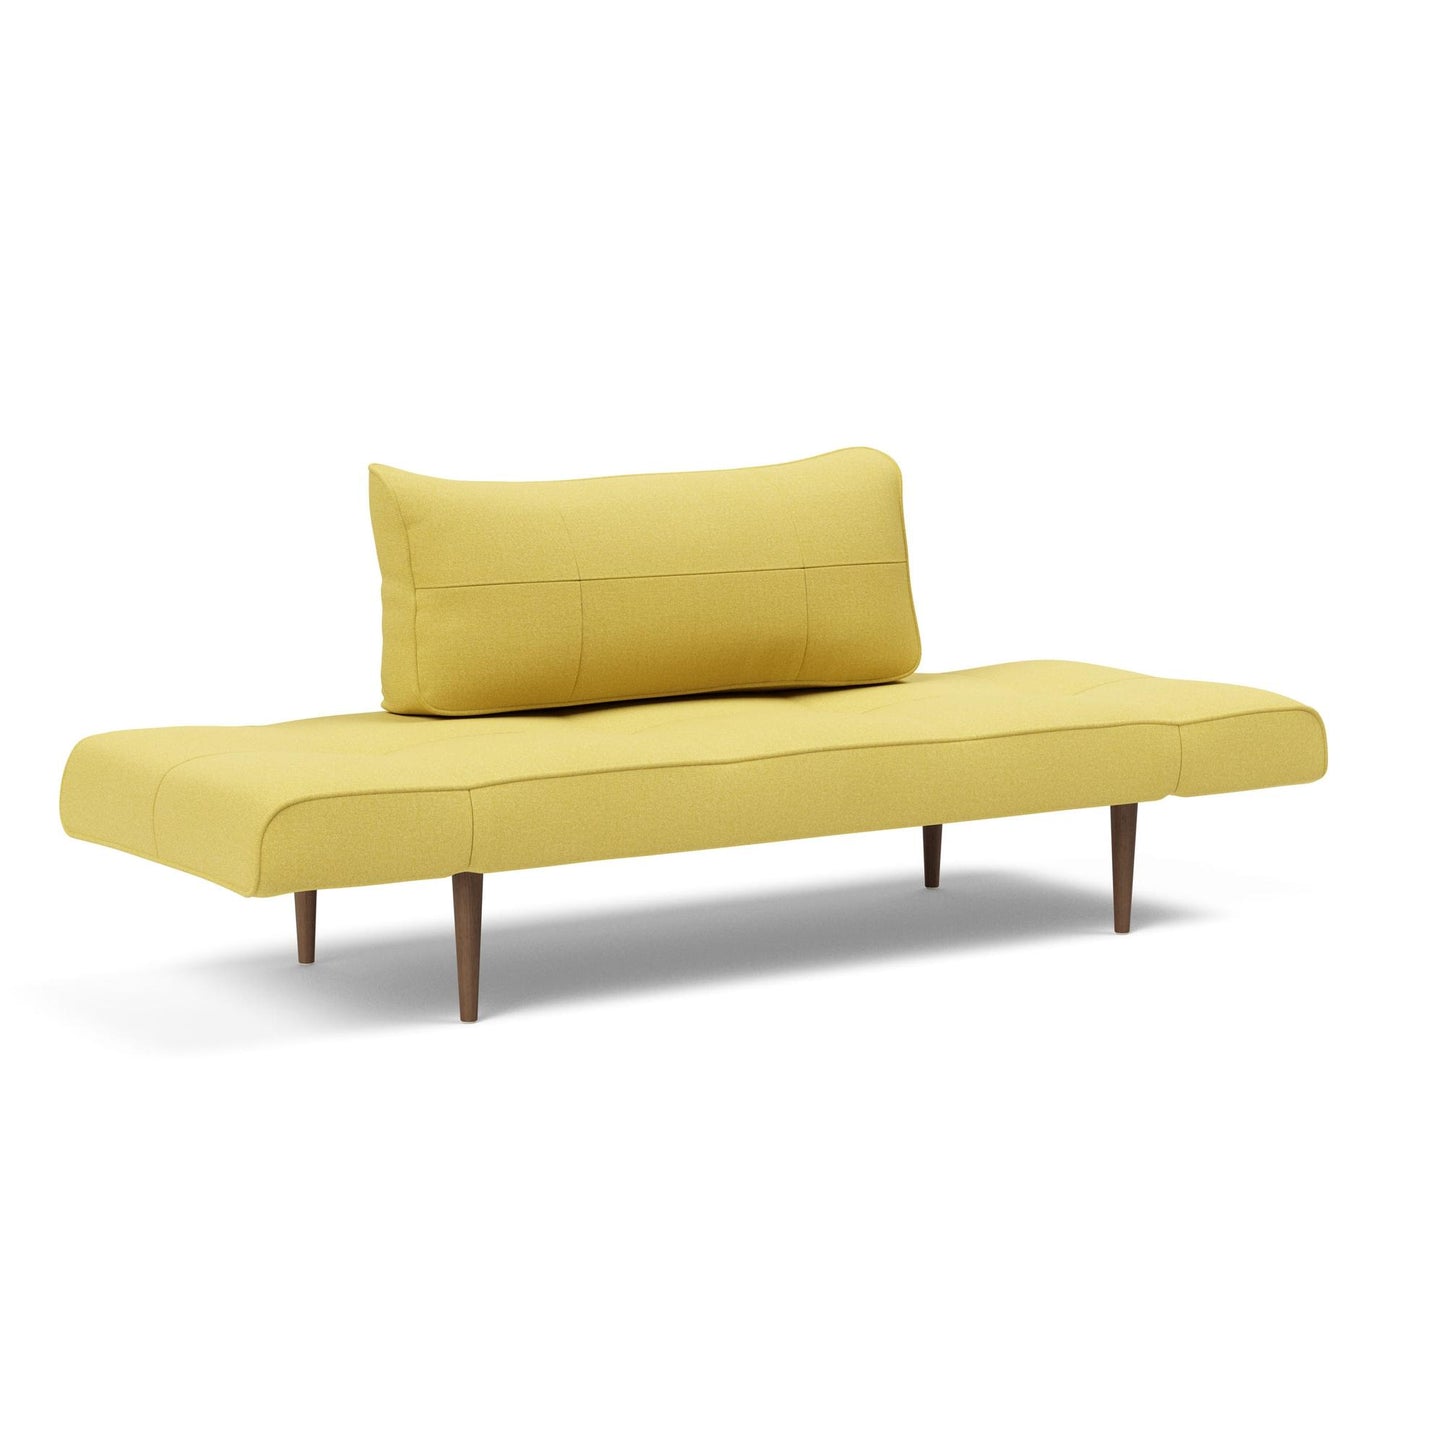 Zeal Deluxe Daybed Sofa Bed in Soft Mustard Flower